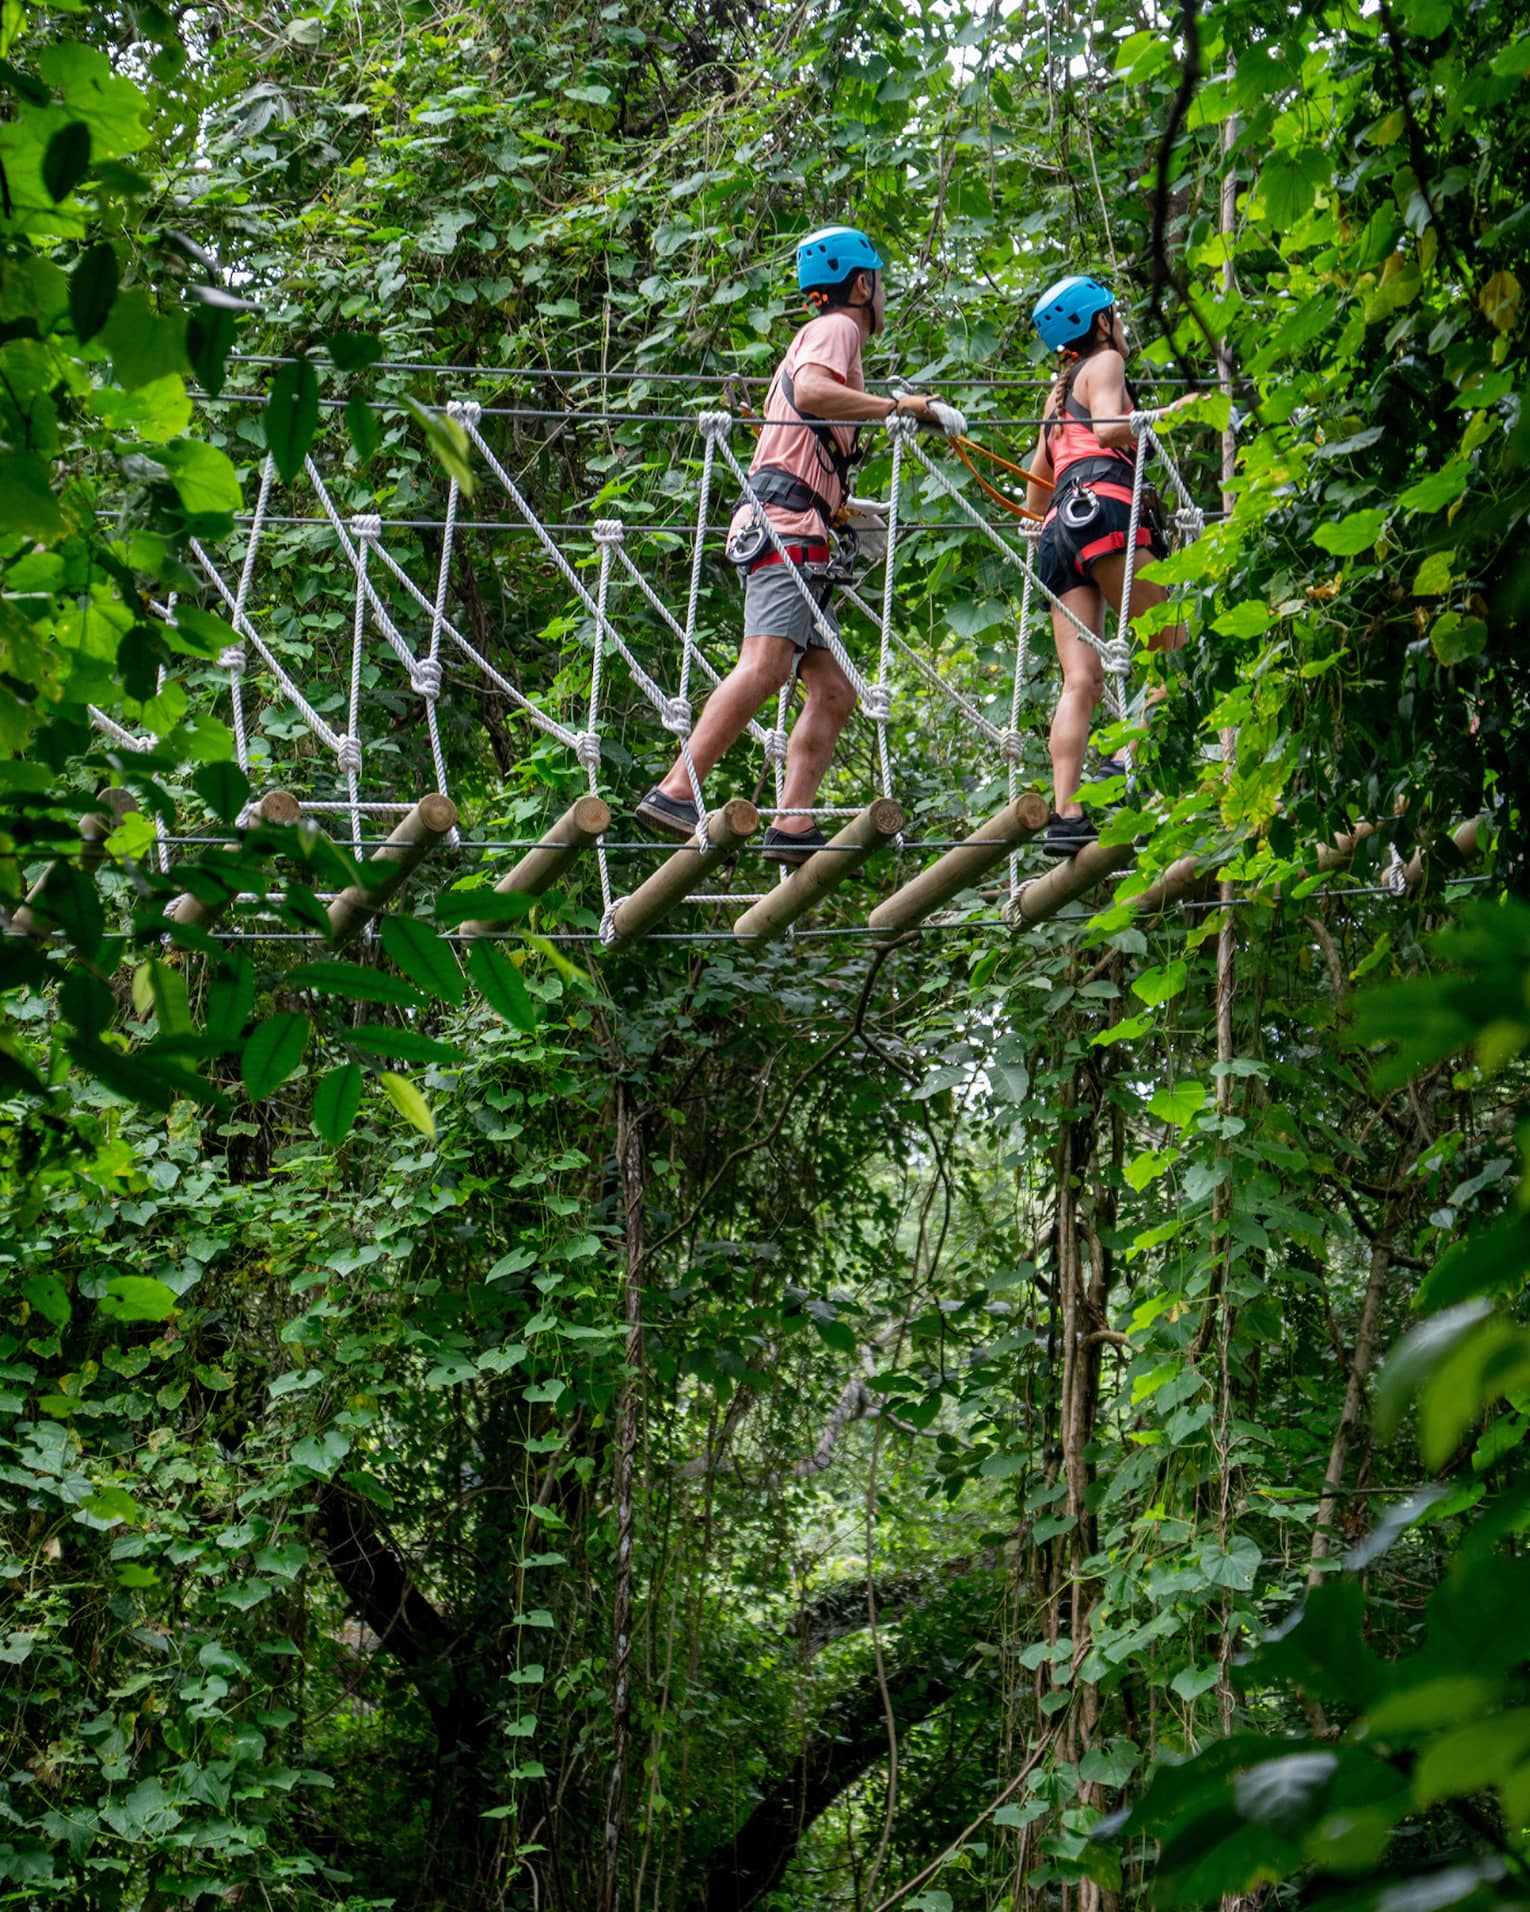 Two people wearing blue helmets walking through a thick treeline on an aerial ropes course